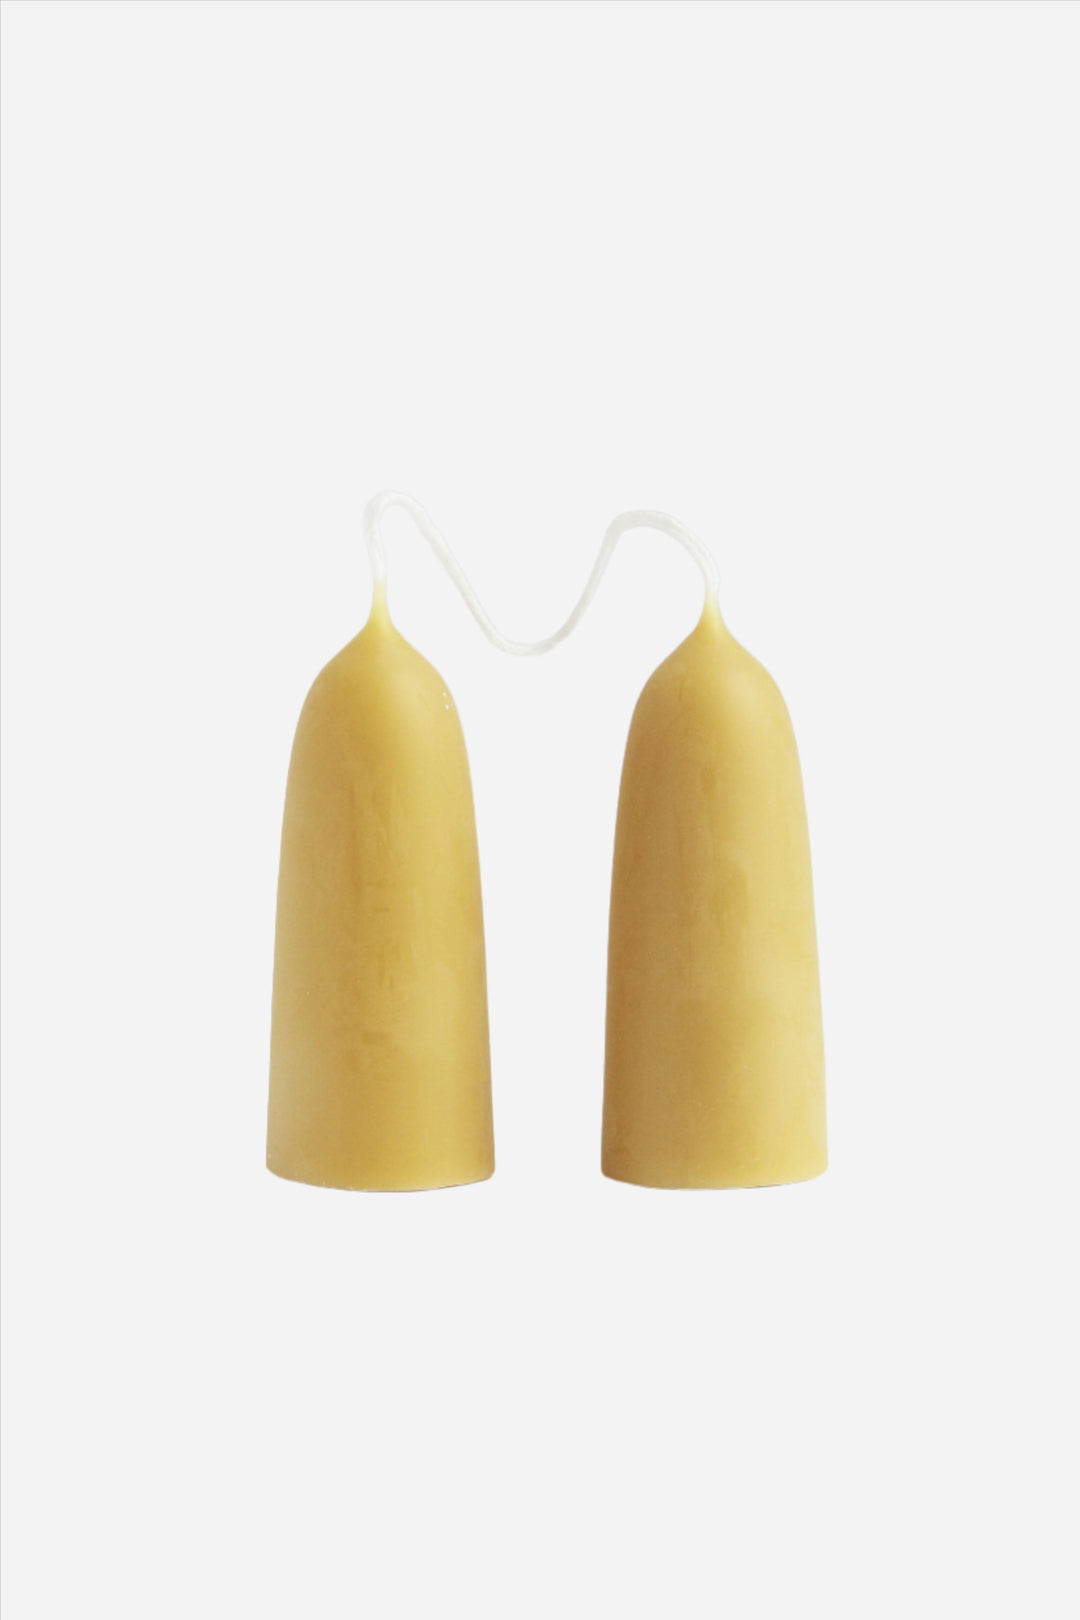 Pair of Stumpy Beeswax Candles - Domestic Science Home